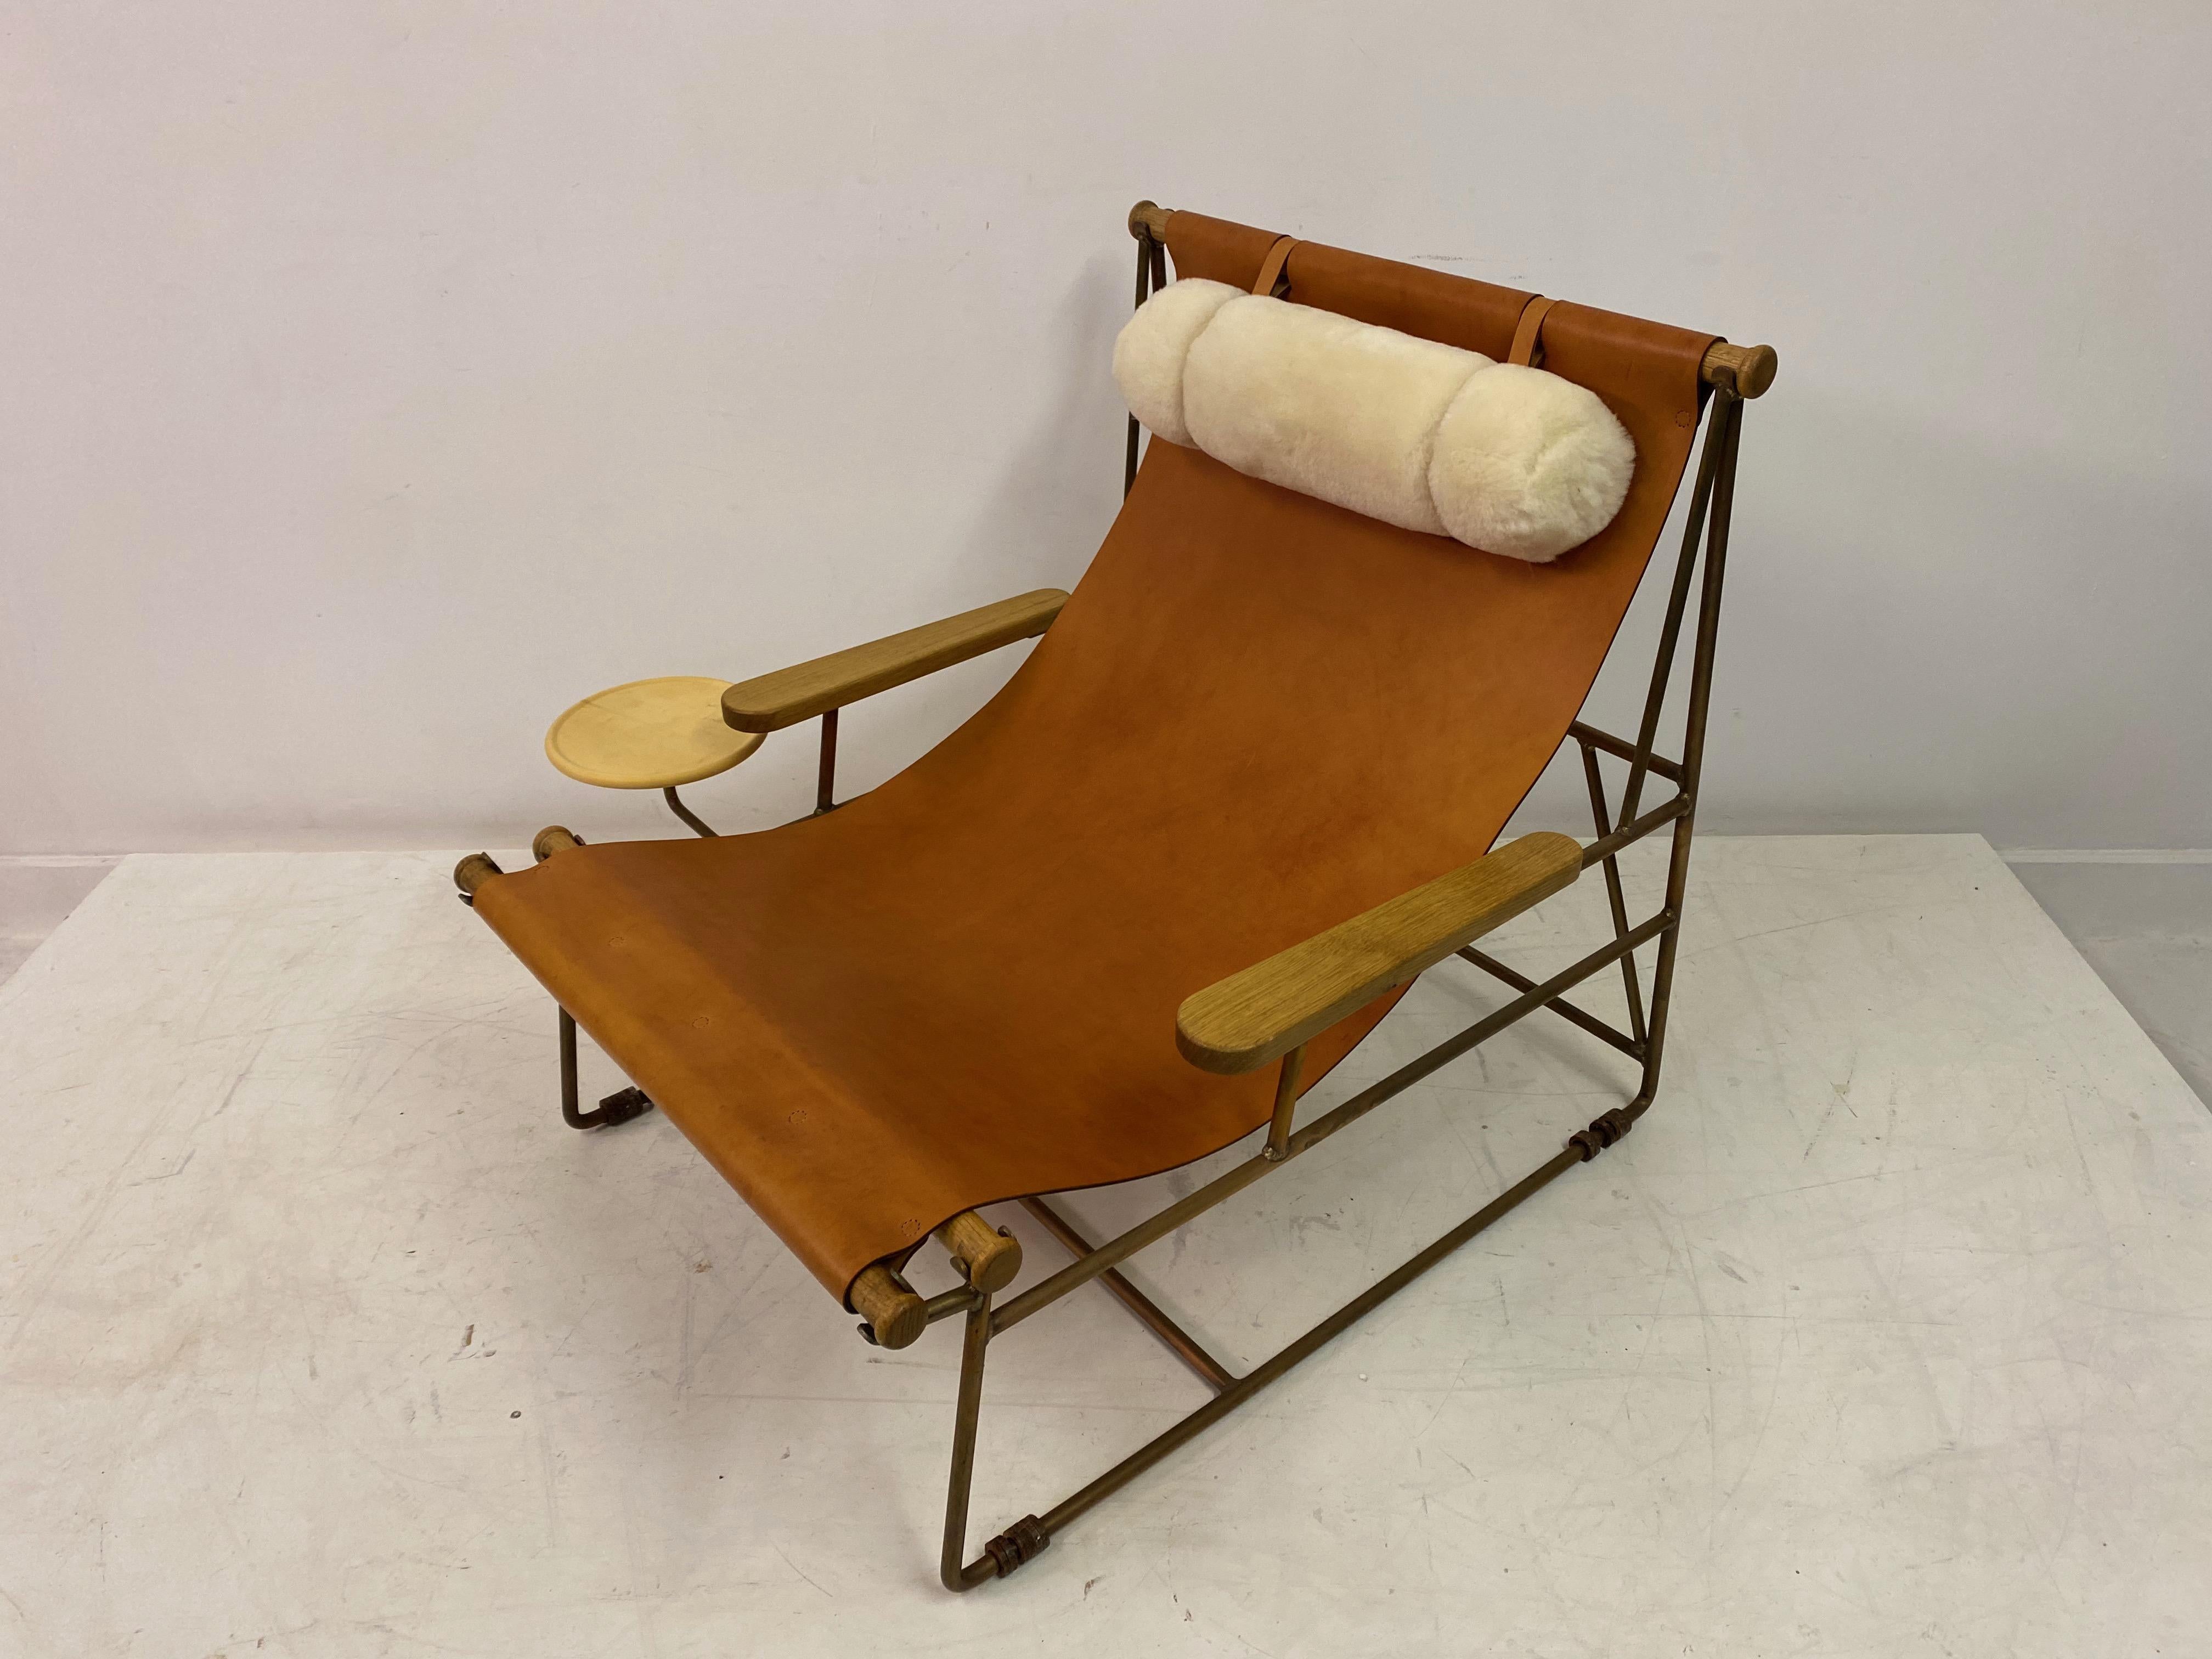 Leather Deck Lounge Chair by Tyler Hays for BDDW 1